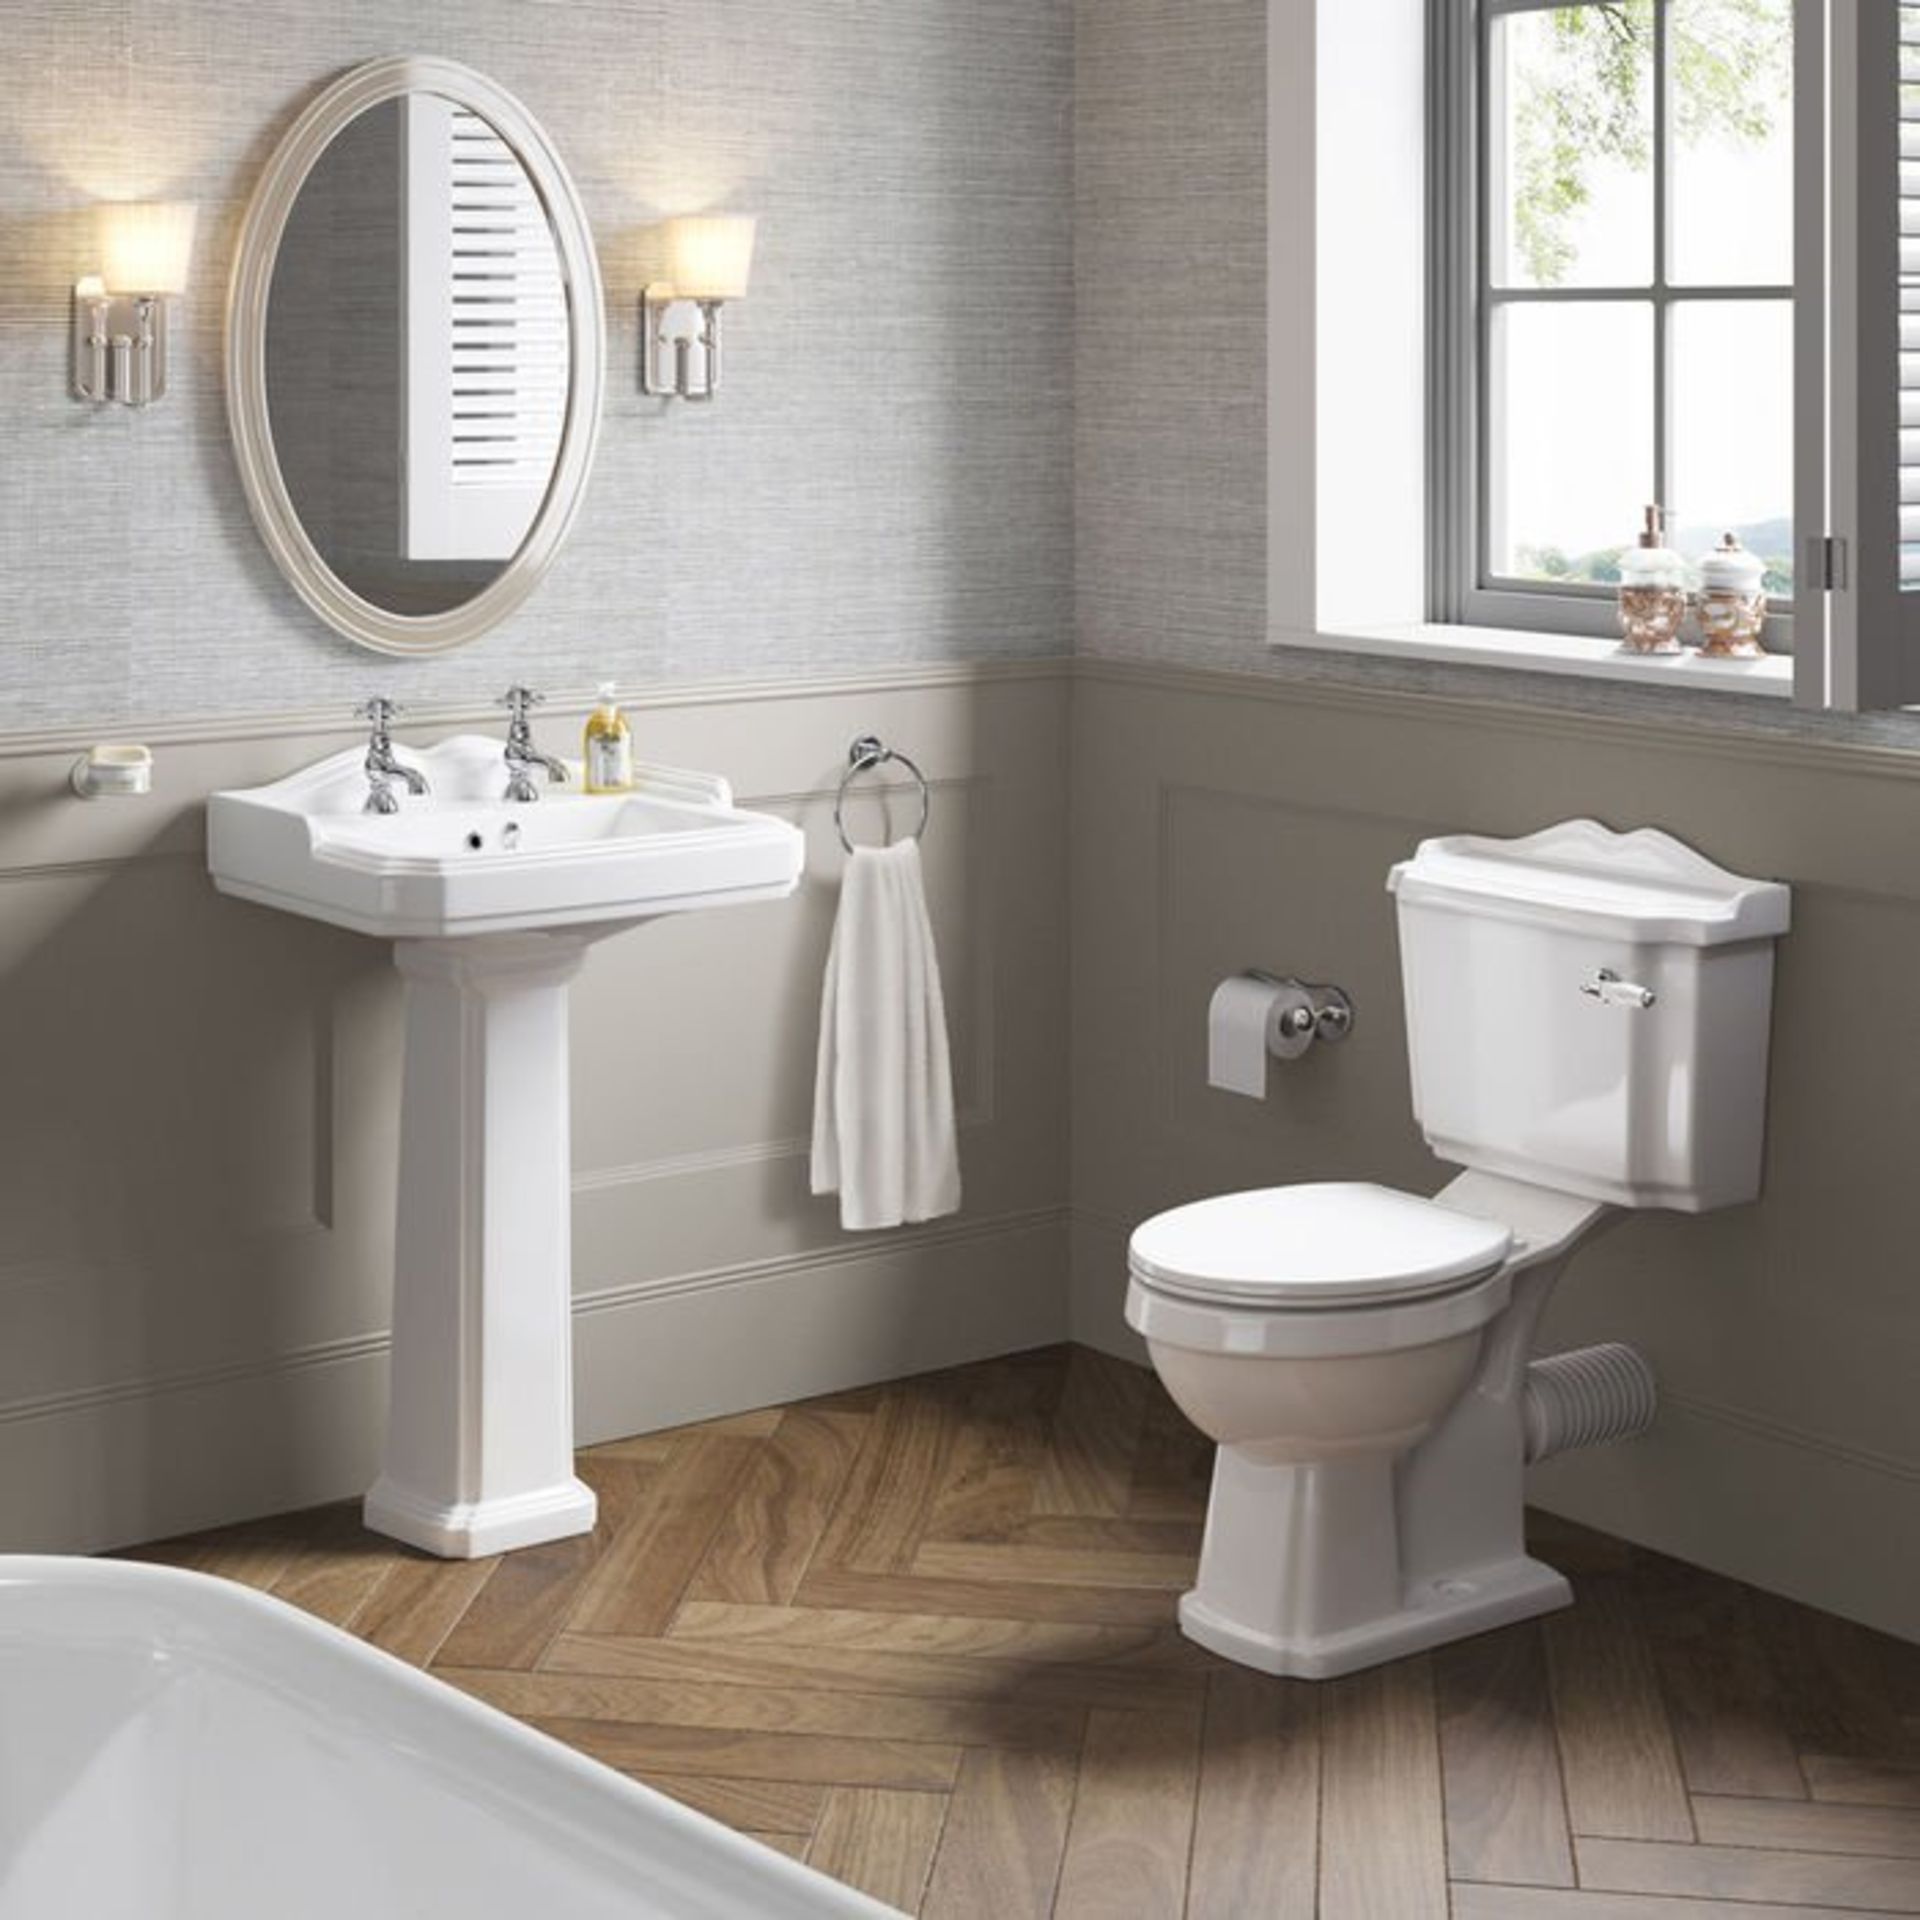 (V236) Victoria Basin & Pedestal - Double Tap Hole. RRP £175.99. Made from White Vitreous China - Image 3 of 3